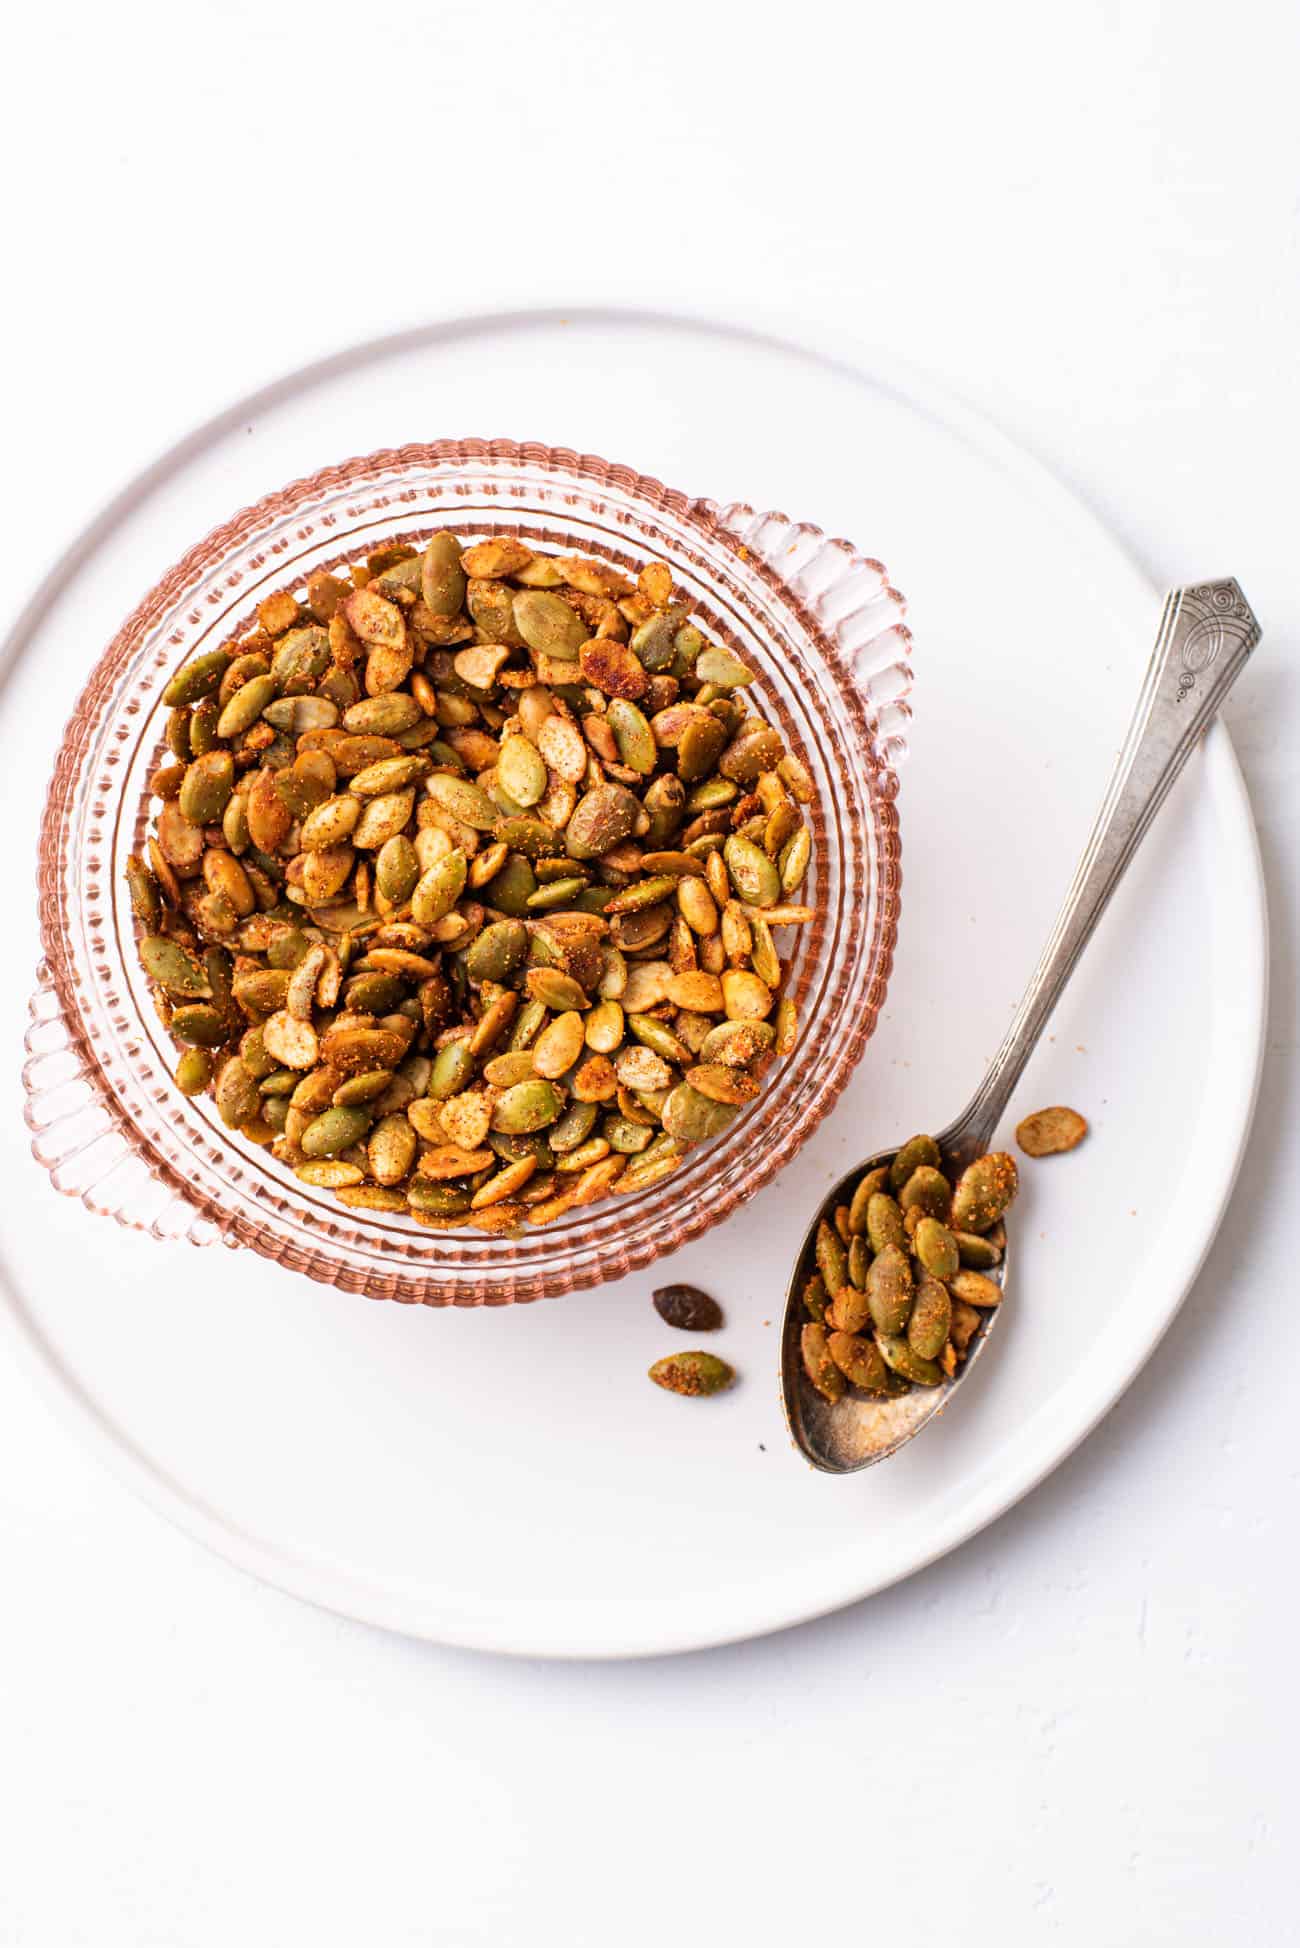 Spiced pumpkin seeds in a pink glass bowl on a white ceramic plate